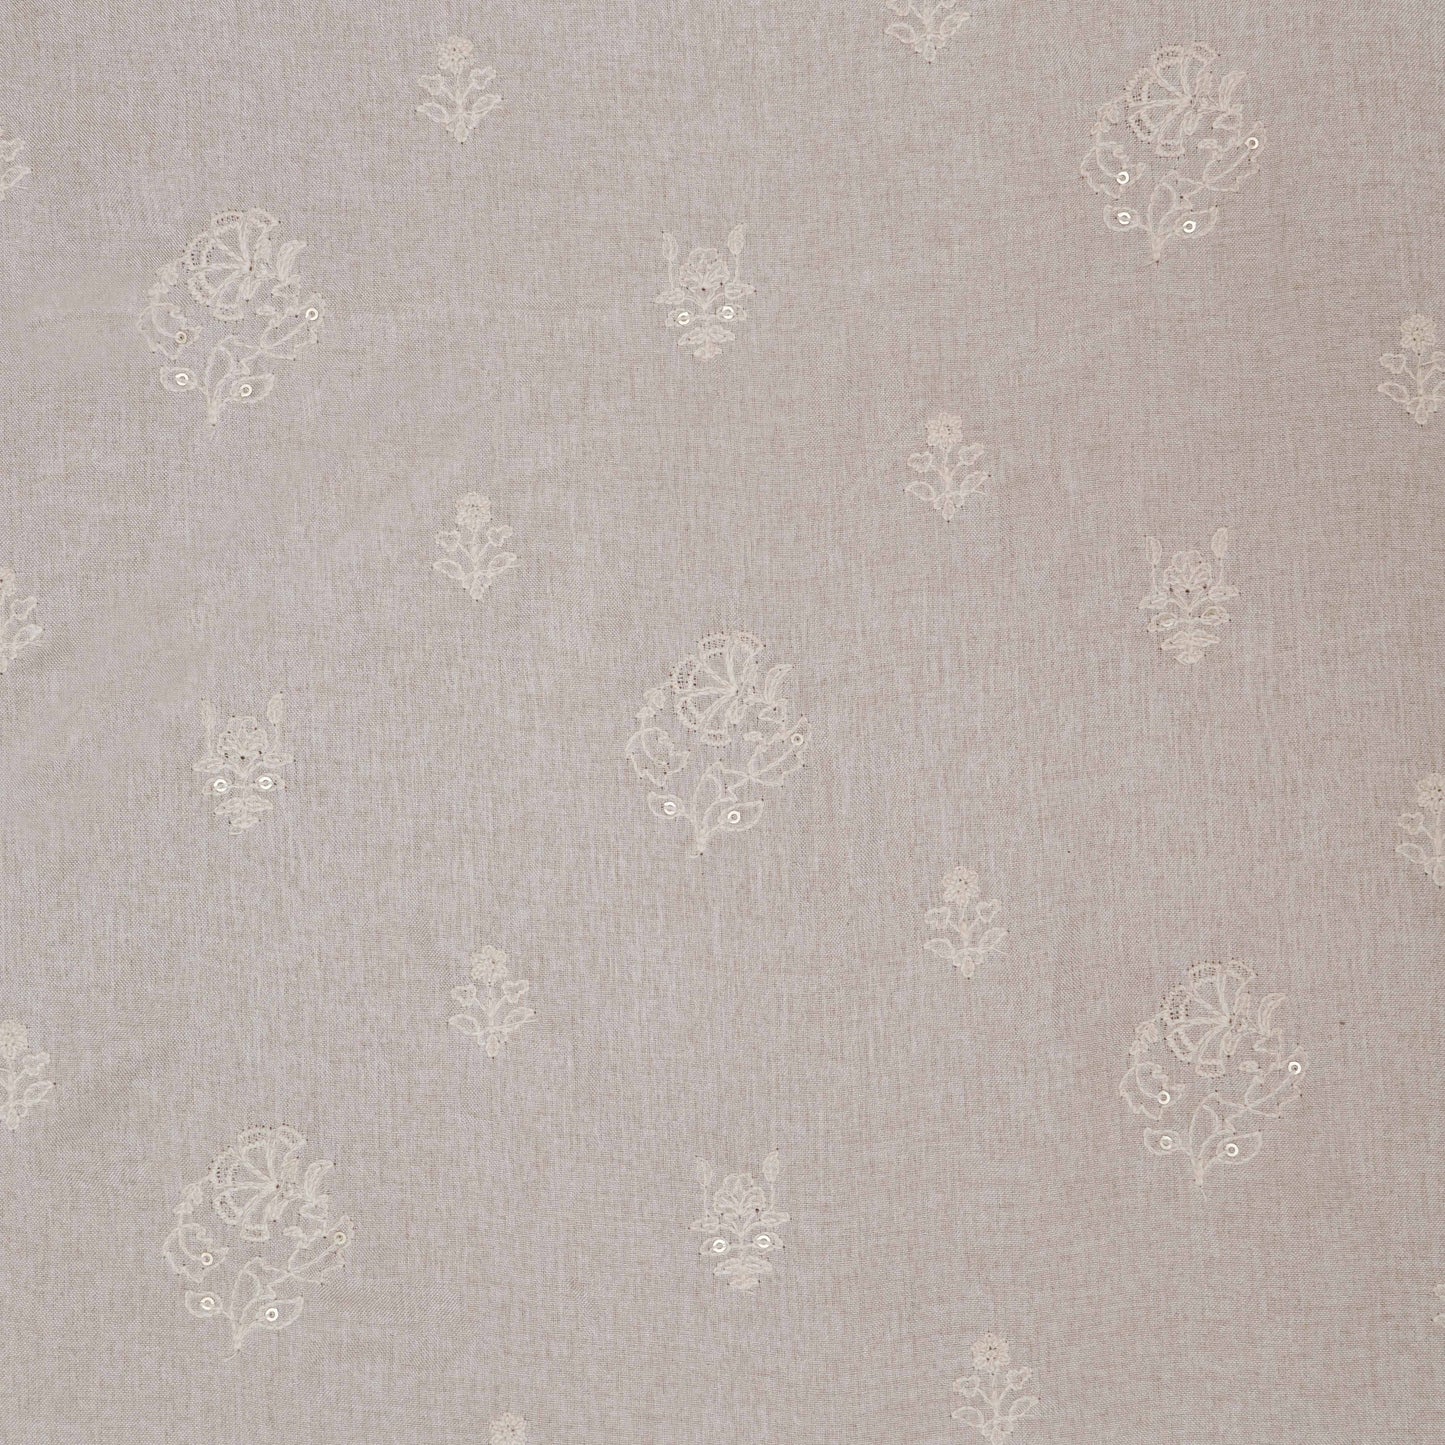 Beige Color Tussar Embroidery Fabric